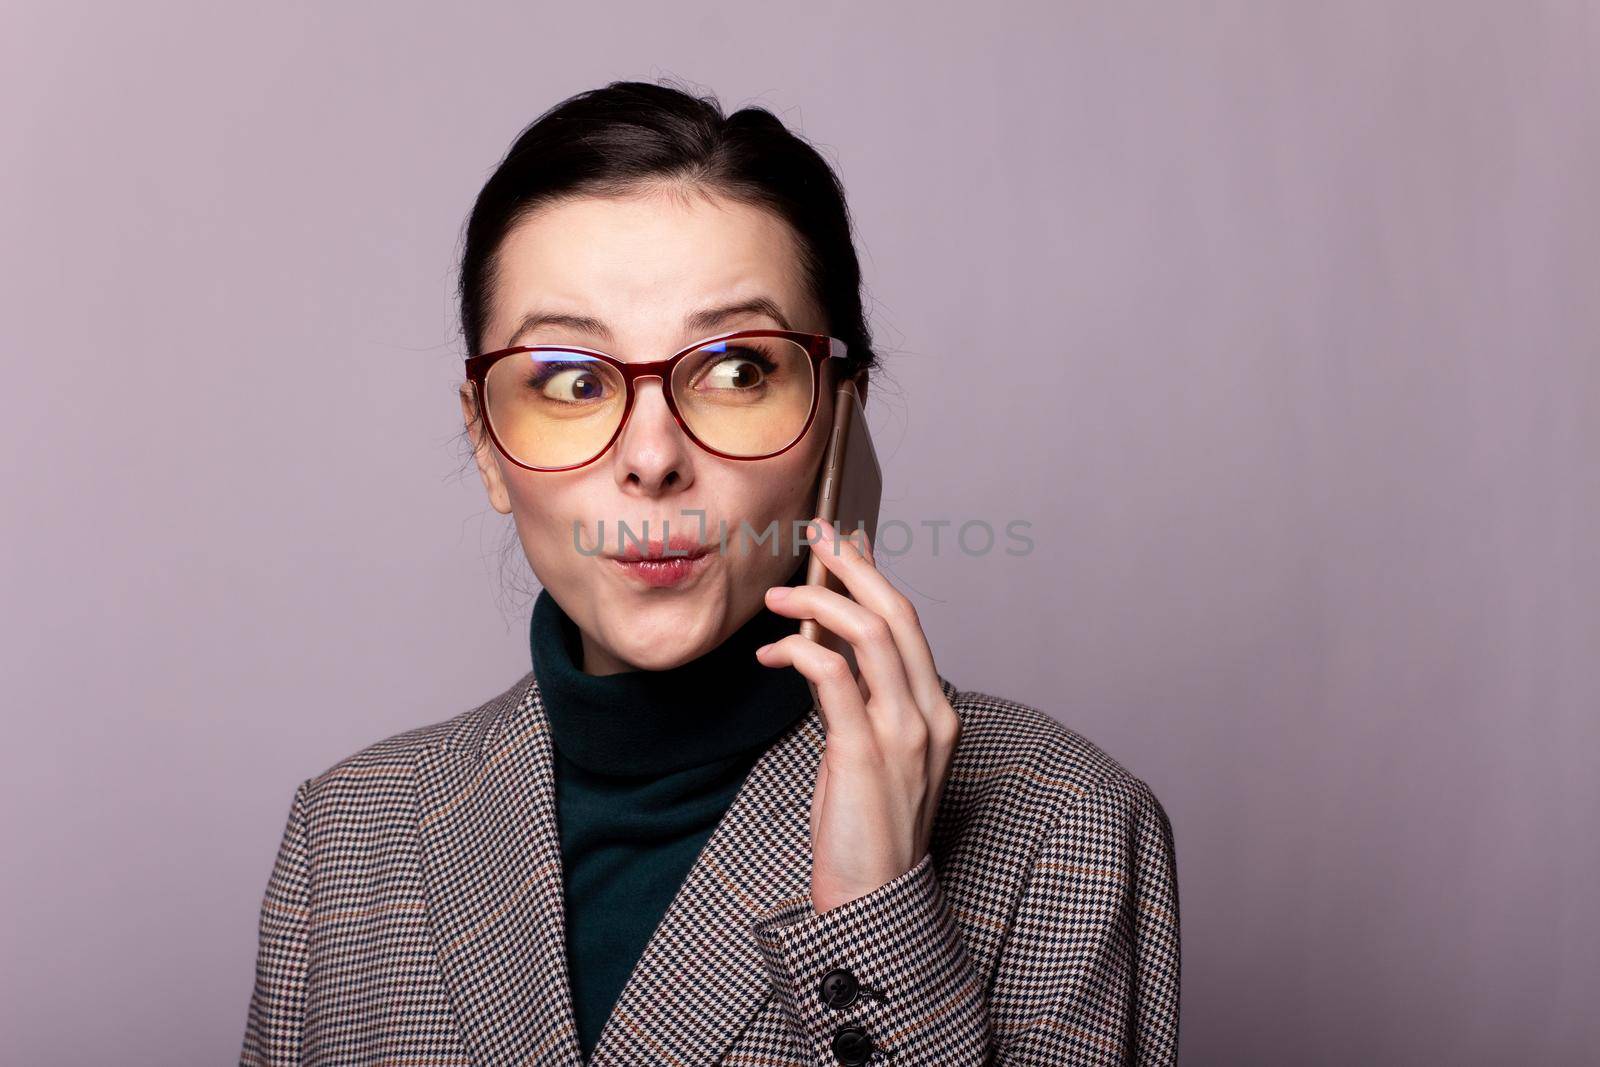 woman in a green turtleneck, jacket, glasses talking on the phone portrait on a gray background. High quality photo